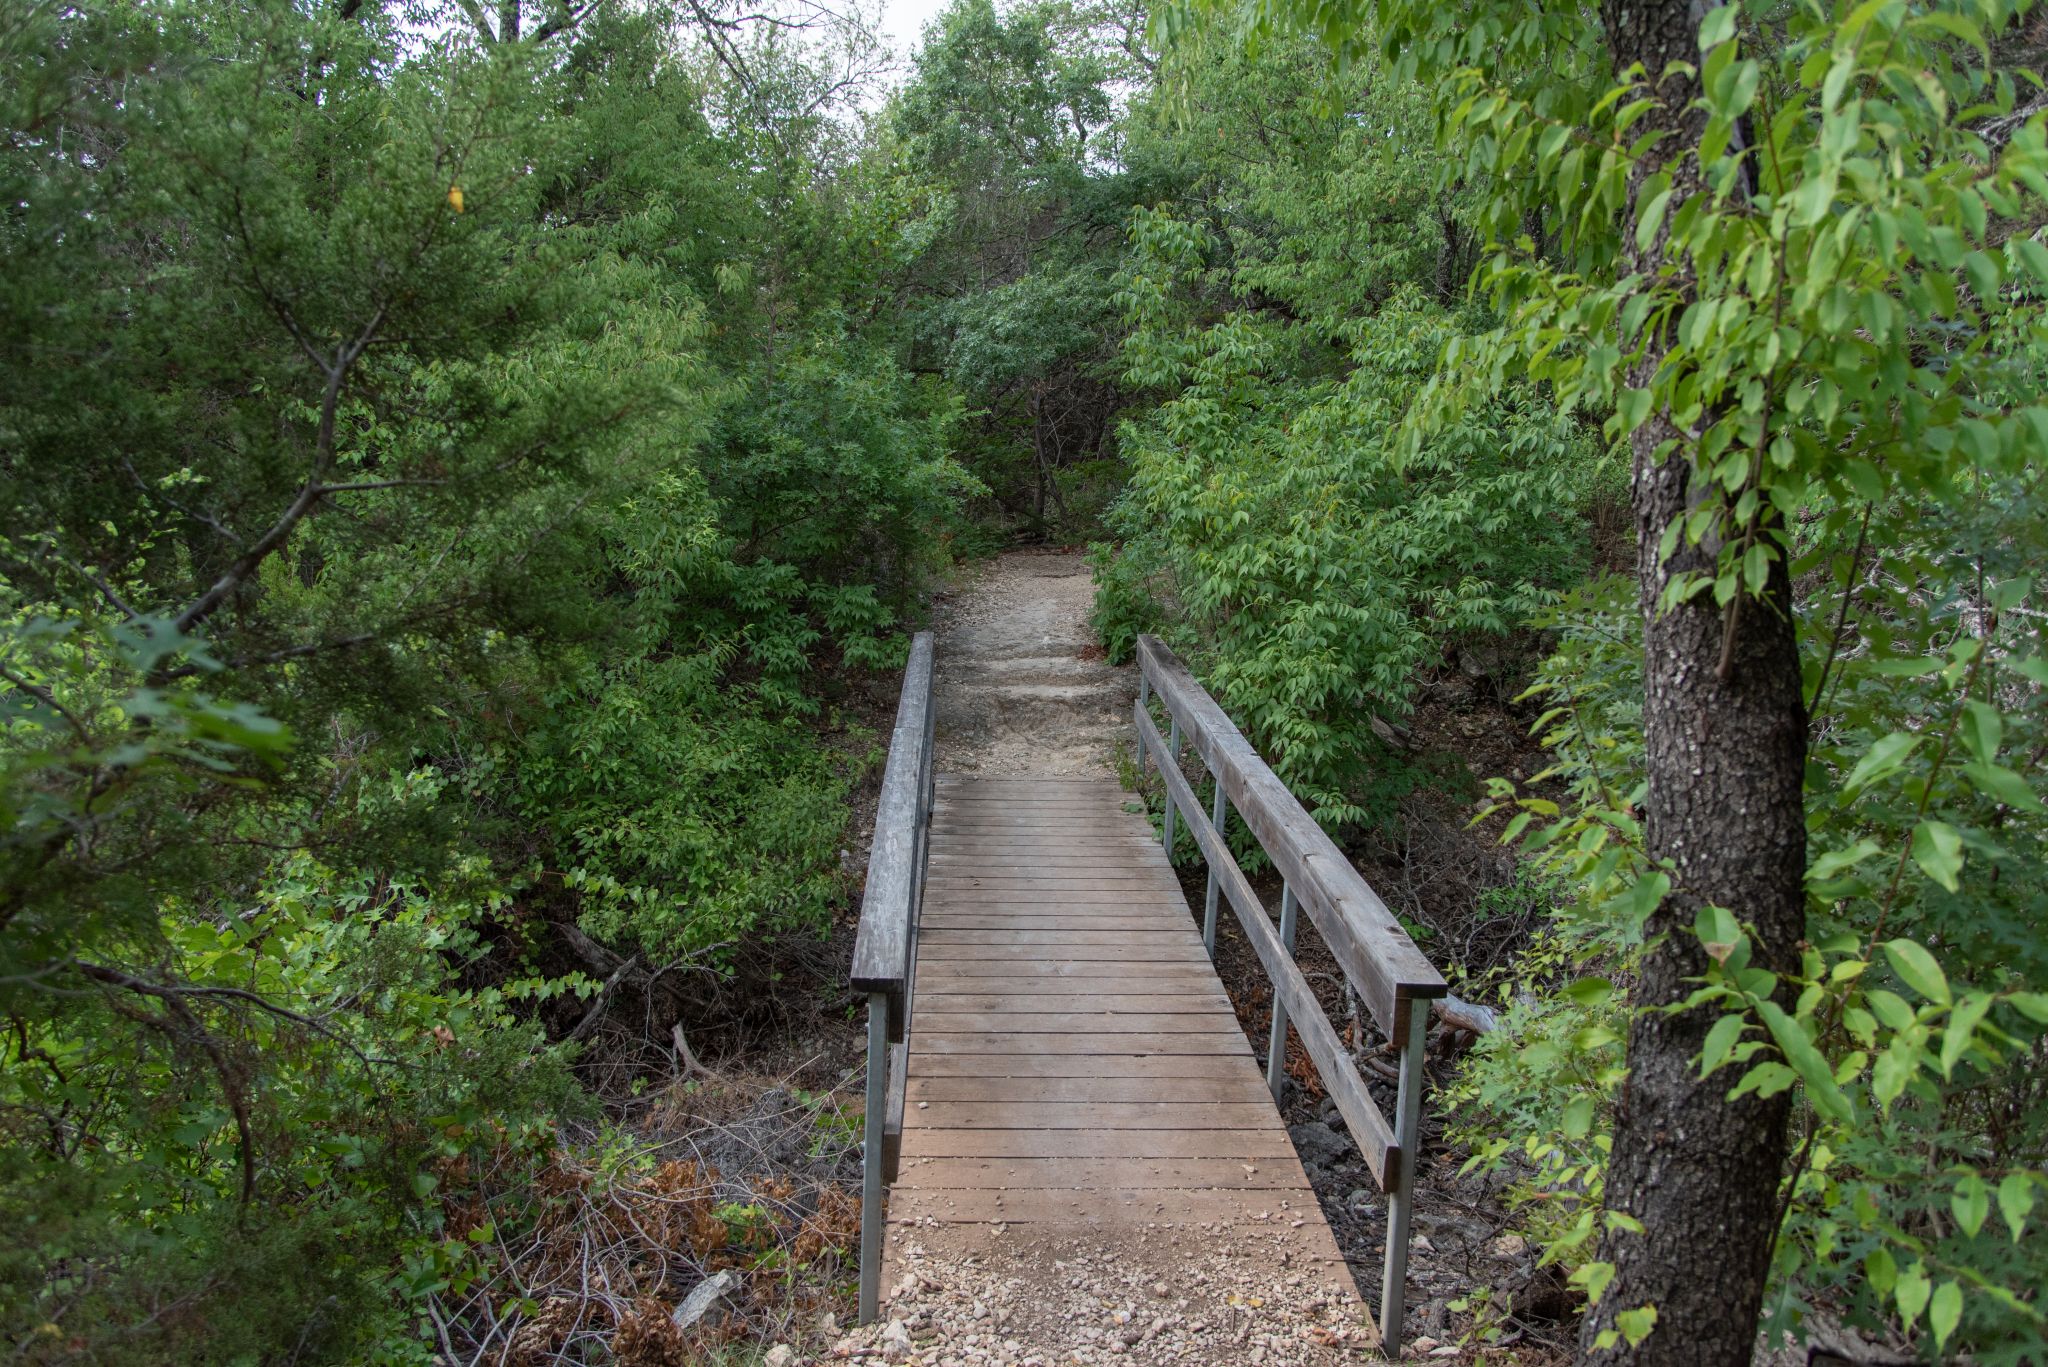 Top 10 spots for hiking trails in San Antonio - RawImage